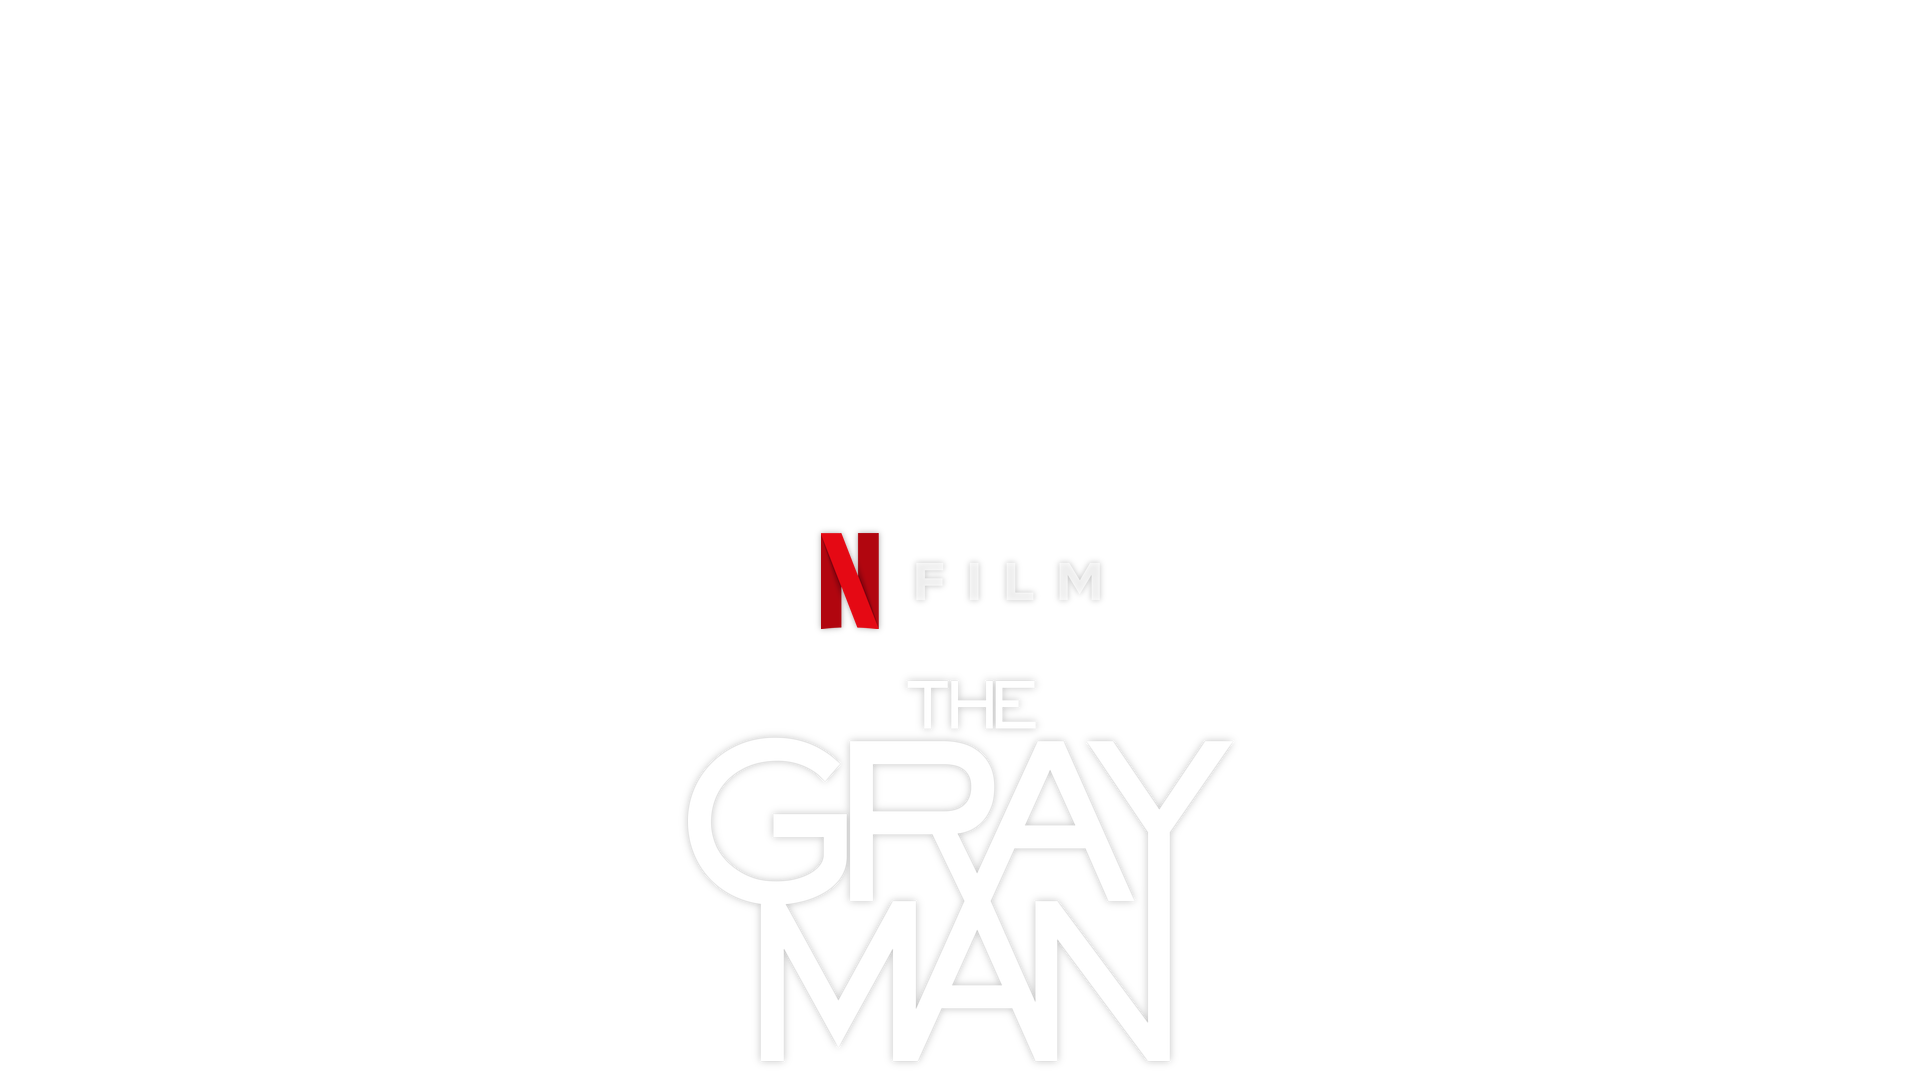 The Gray Man cast and crew's education and background